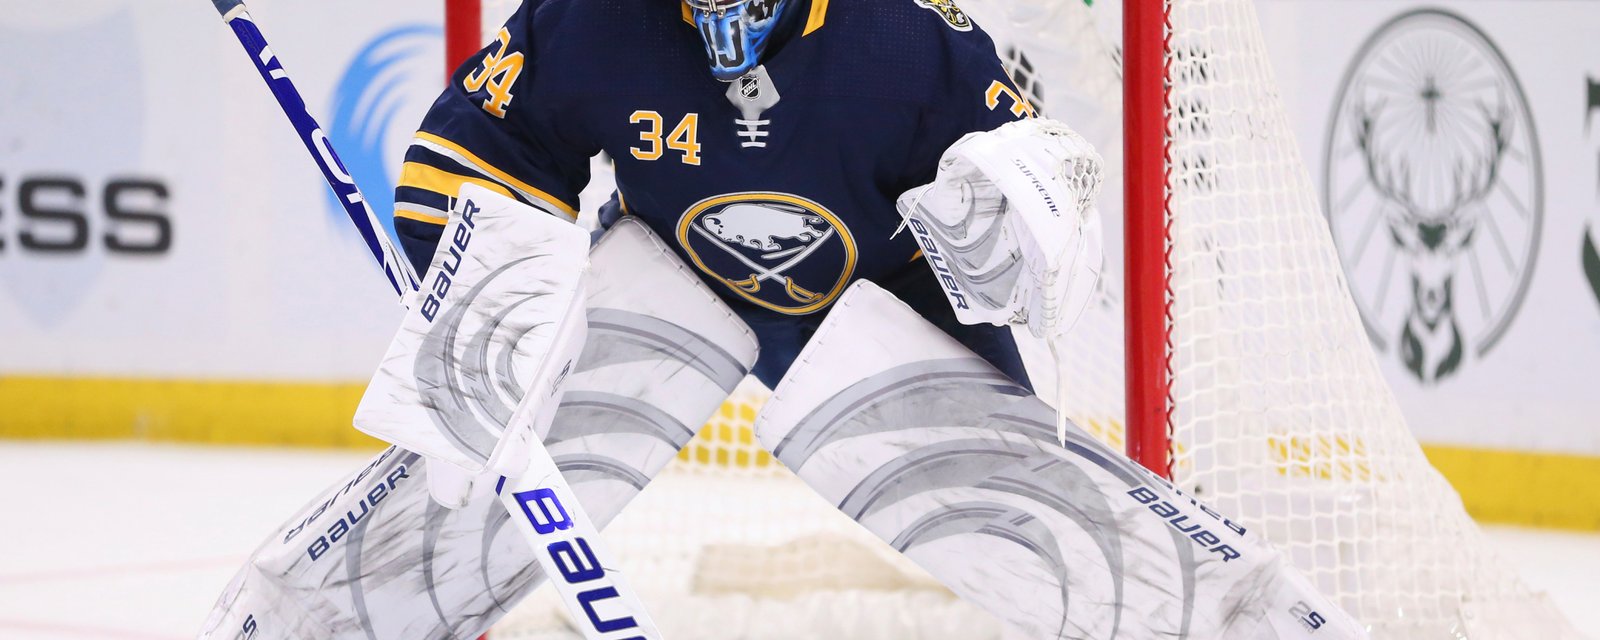 Sabres trade who insider calls “the worst goalie I've seen during my 19 seasons”